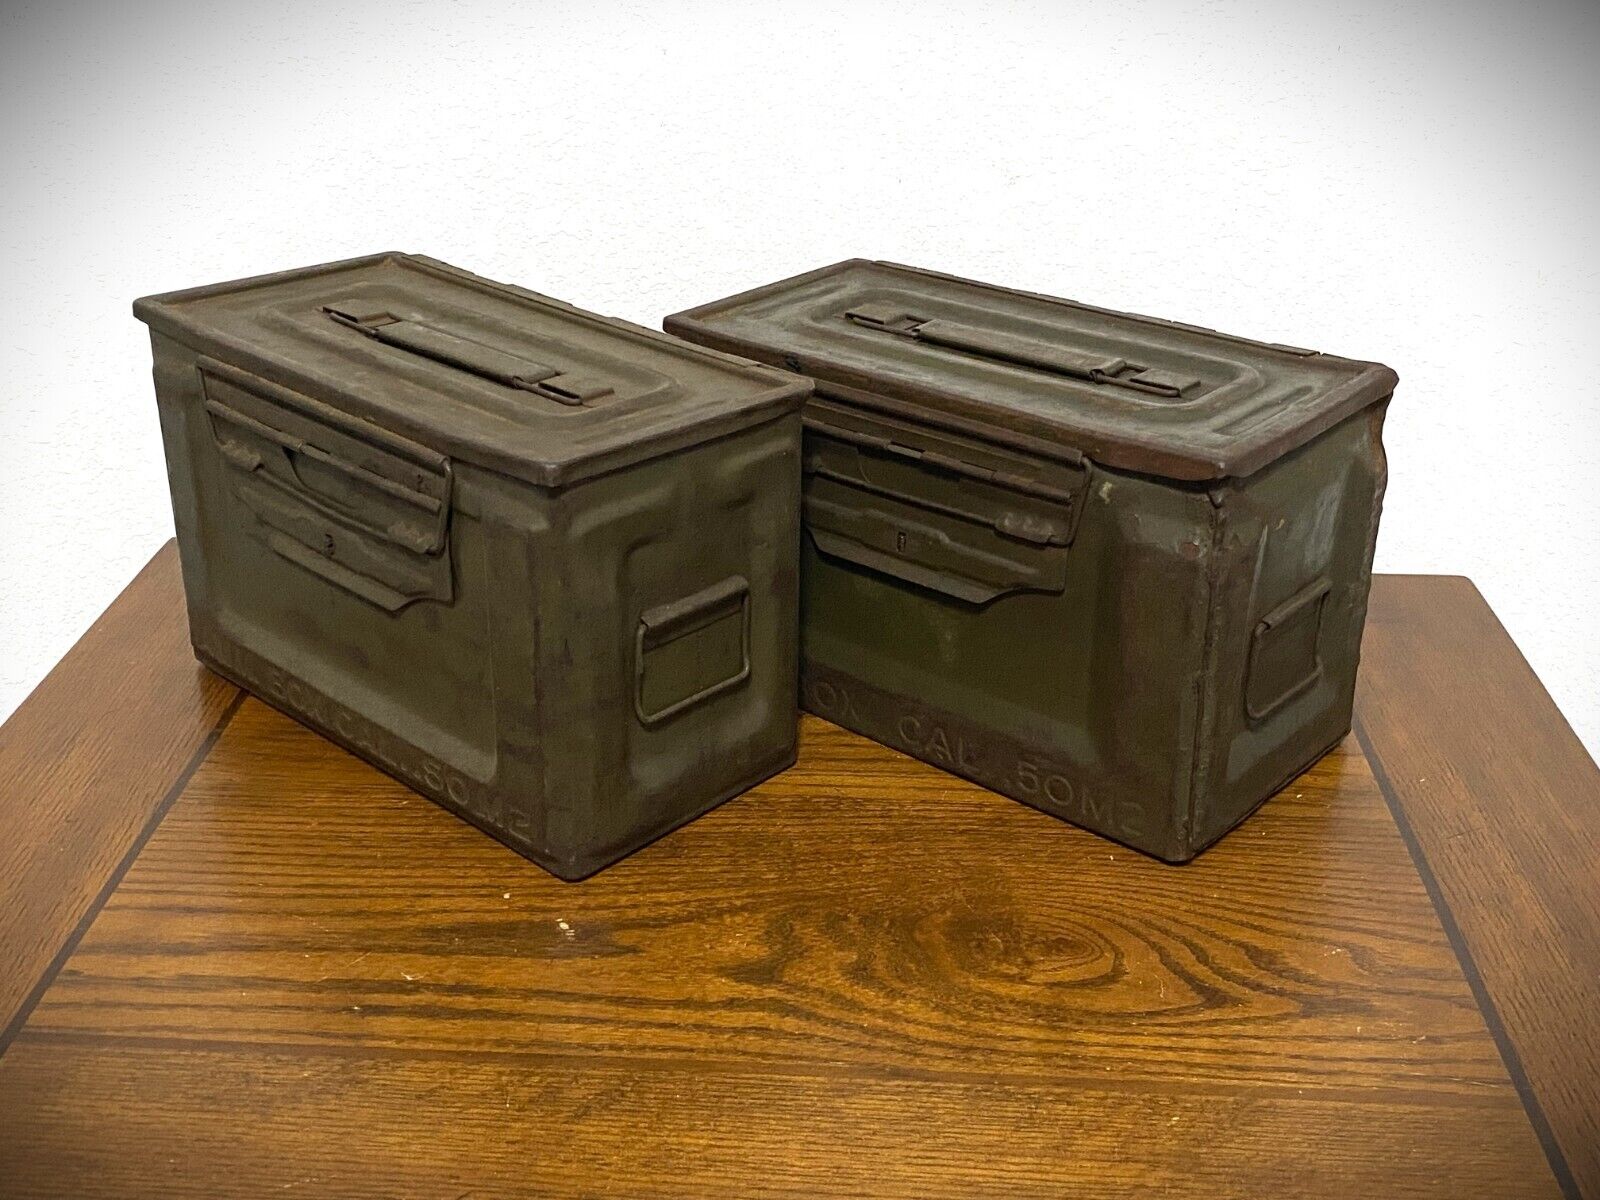 LOT of TWO (2) ORIGINAL WWII US MILITARY M2 .50 CAL AMMO CANS - ARMY \